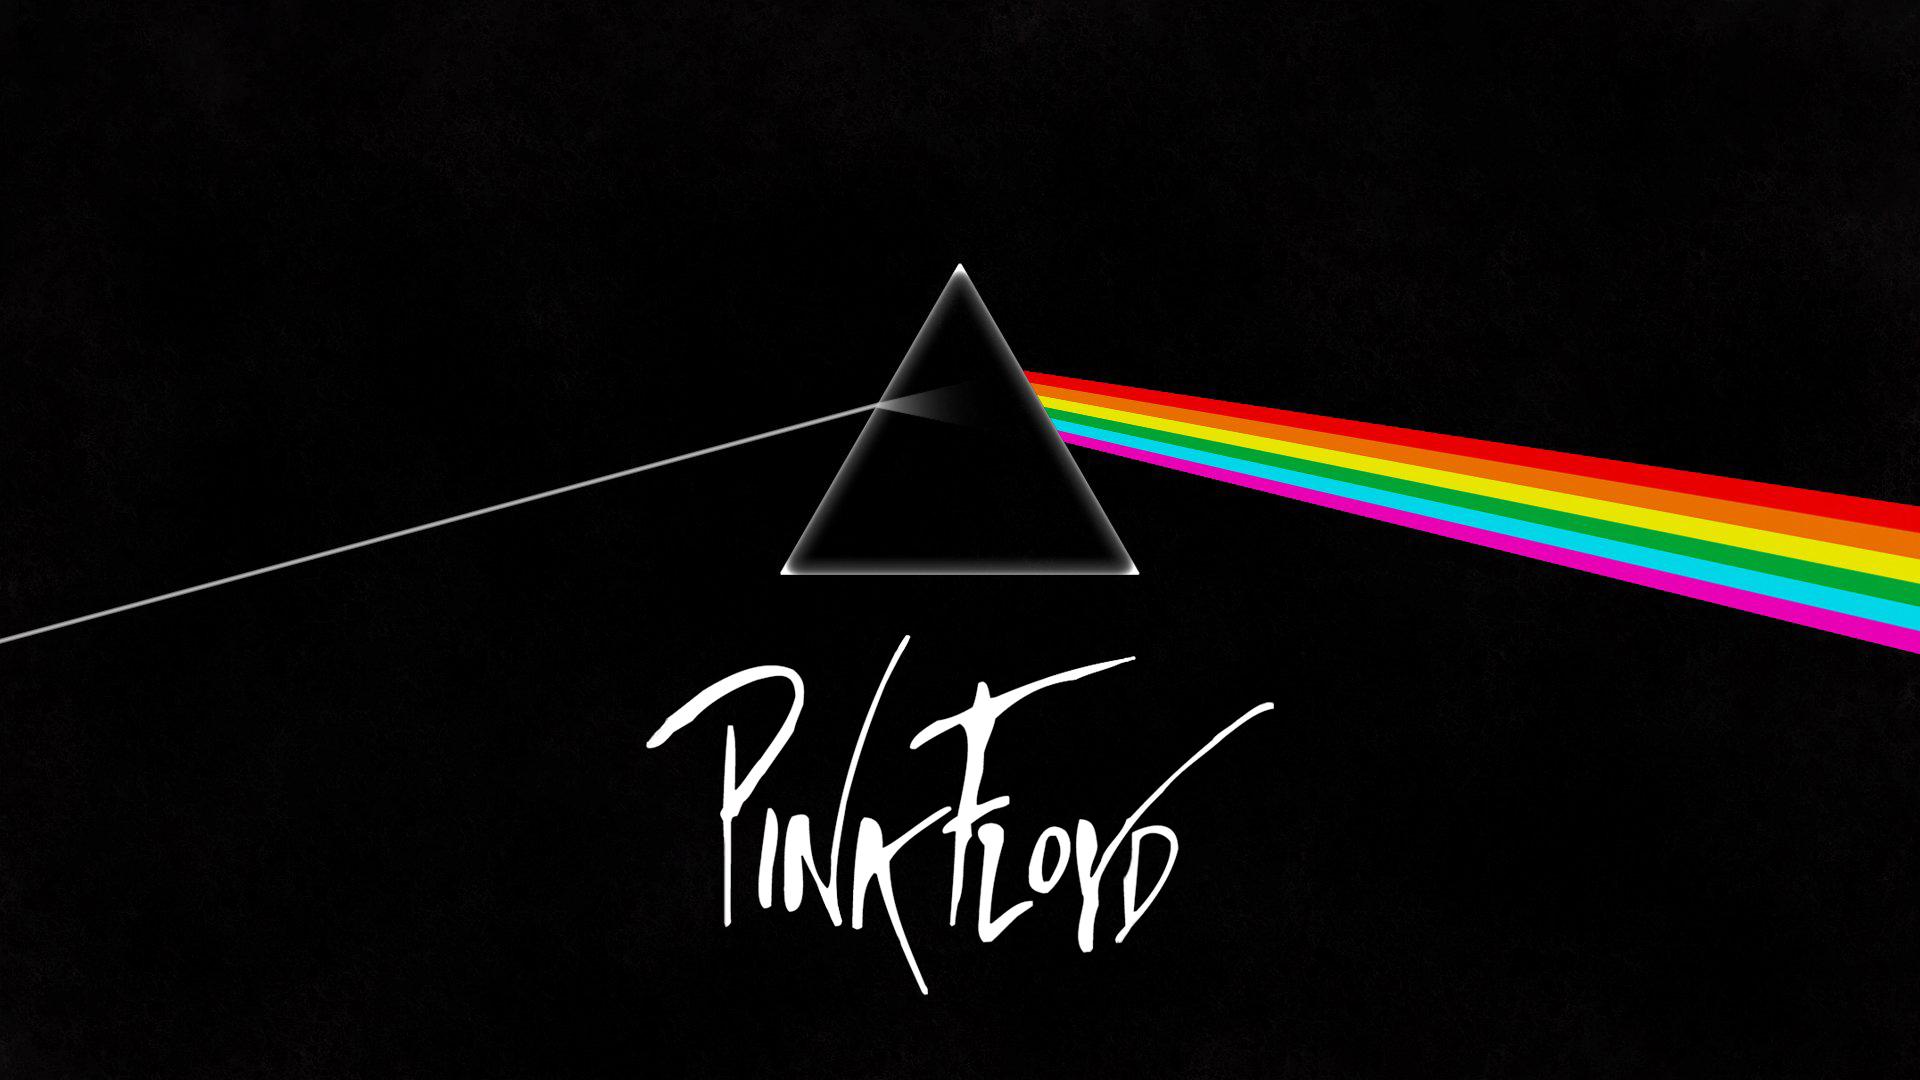 Psychedelic Pink Floyd Wallpaper Iphone